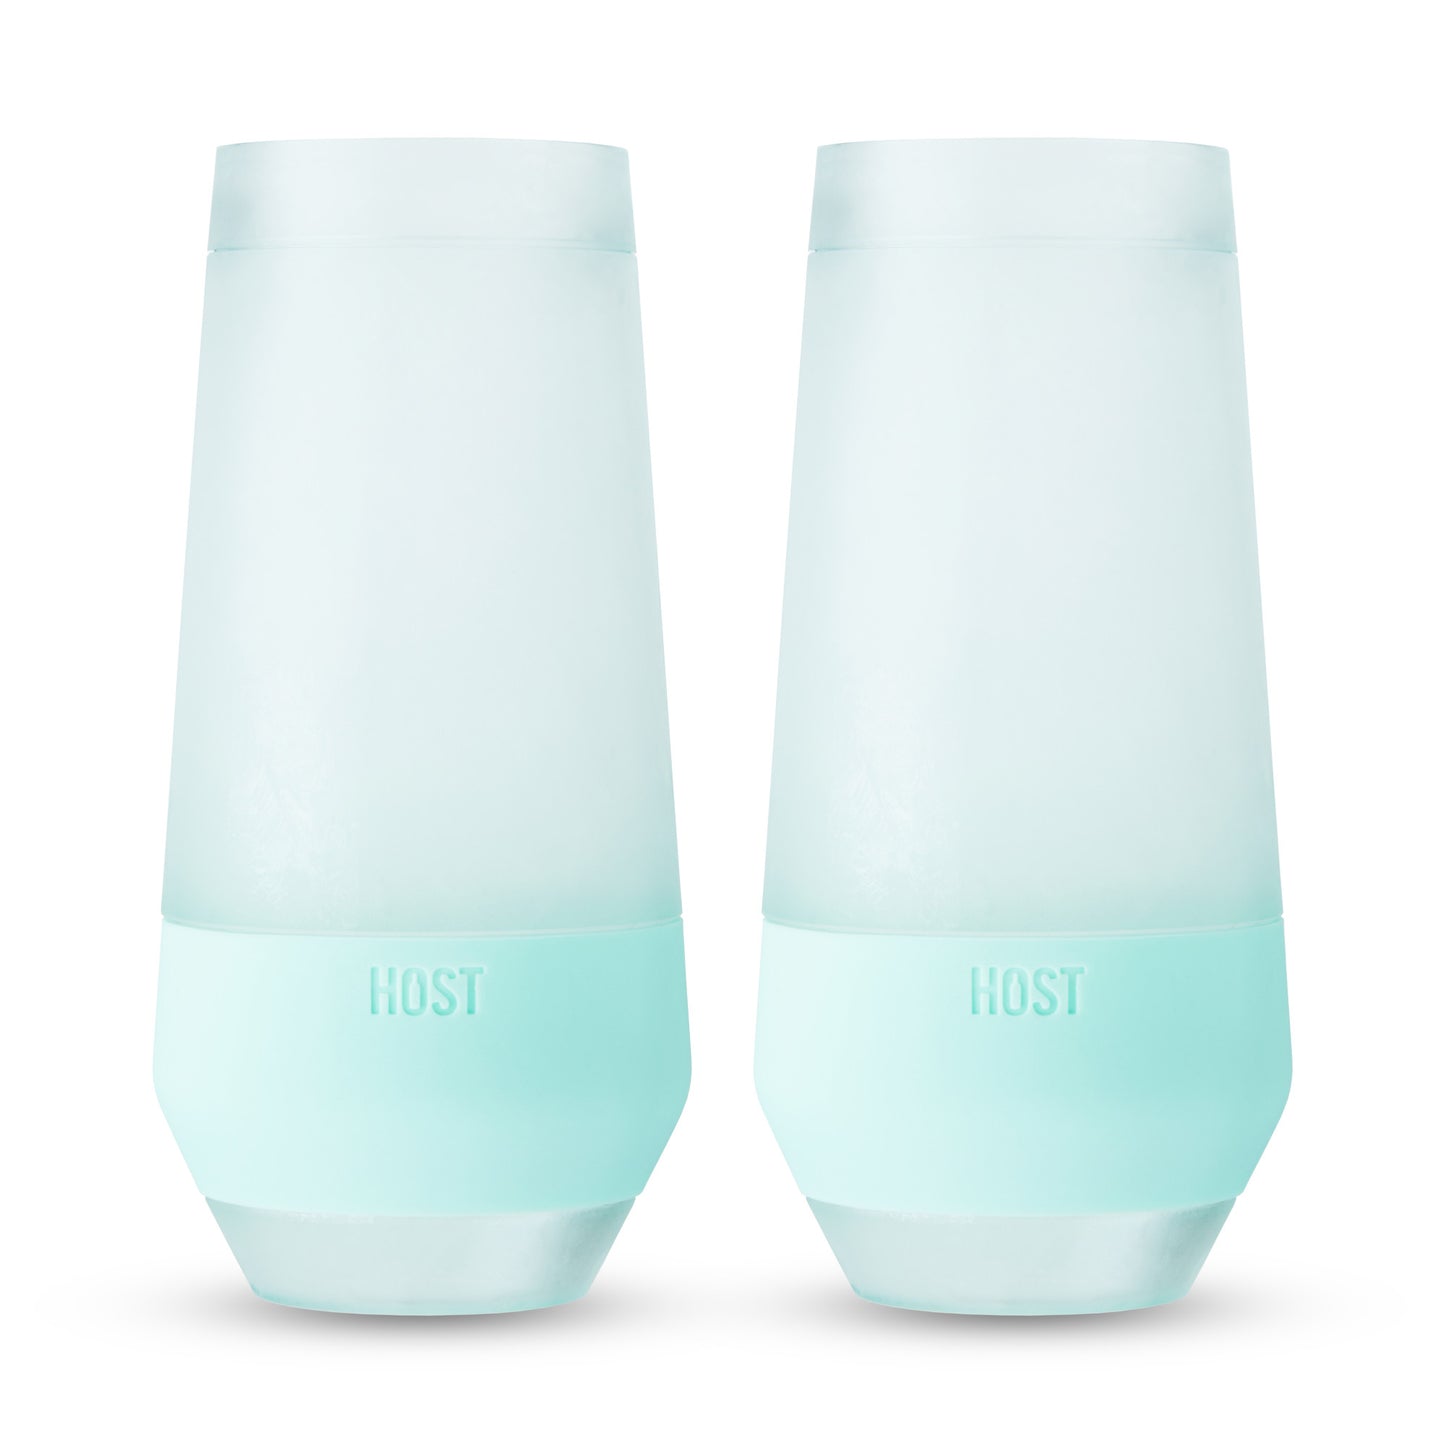 Champagne FREEZE™ in Seafoam Tint (set of 2)